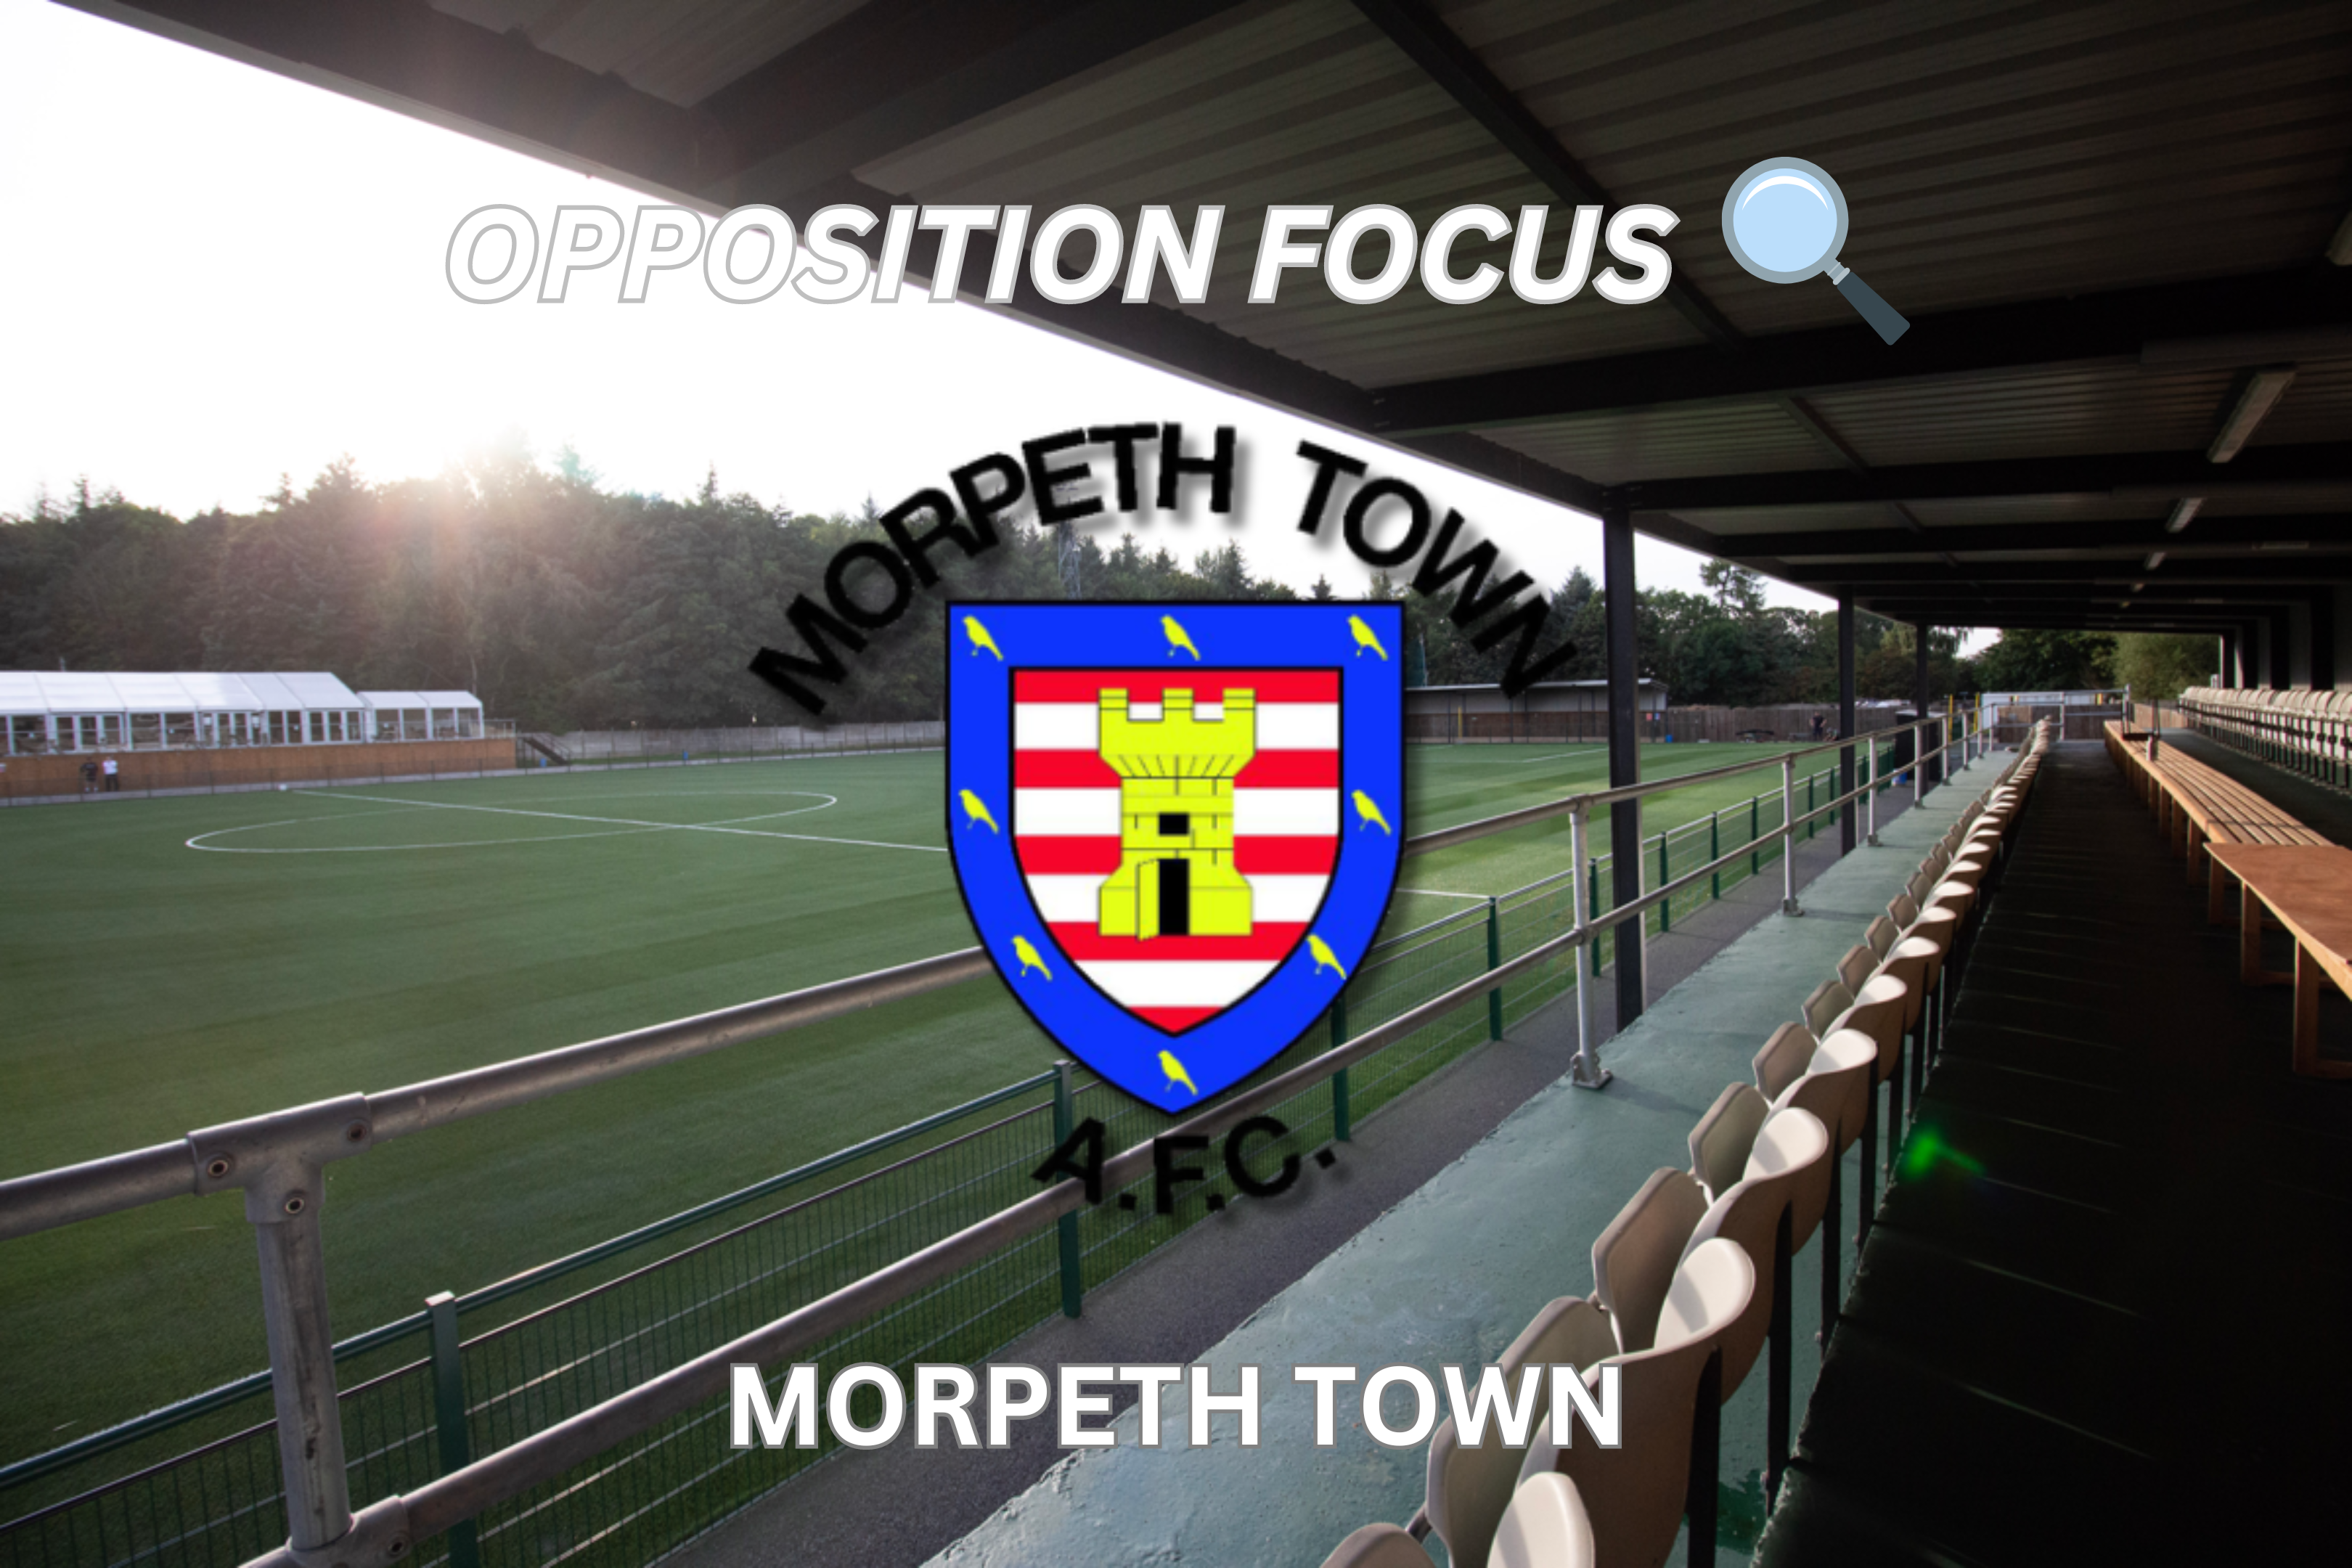 OPPOSITION FOCUS: MORPETH TOWN